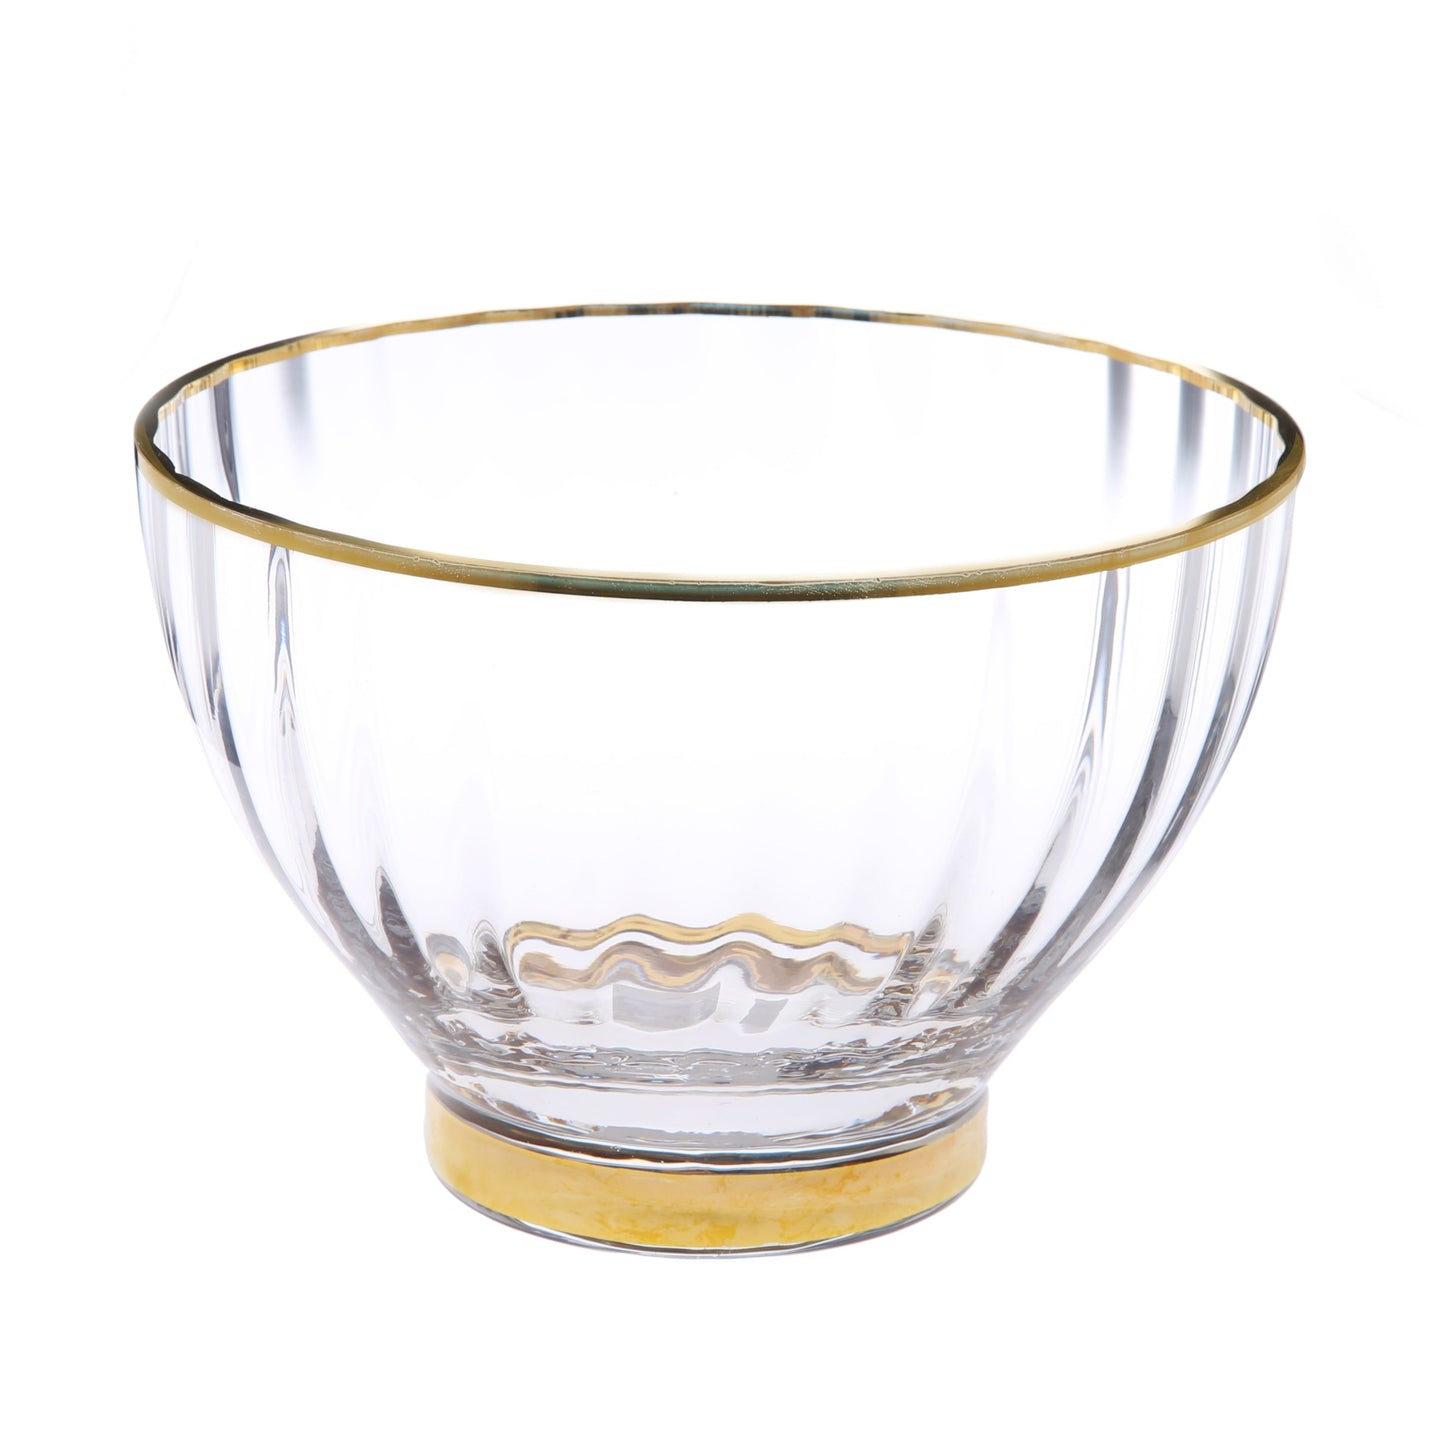 Textured Salad Bowl with Gold Rim and Base